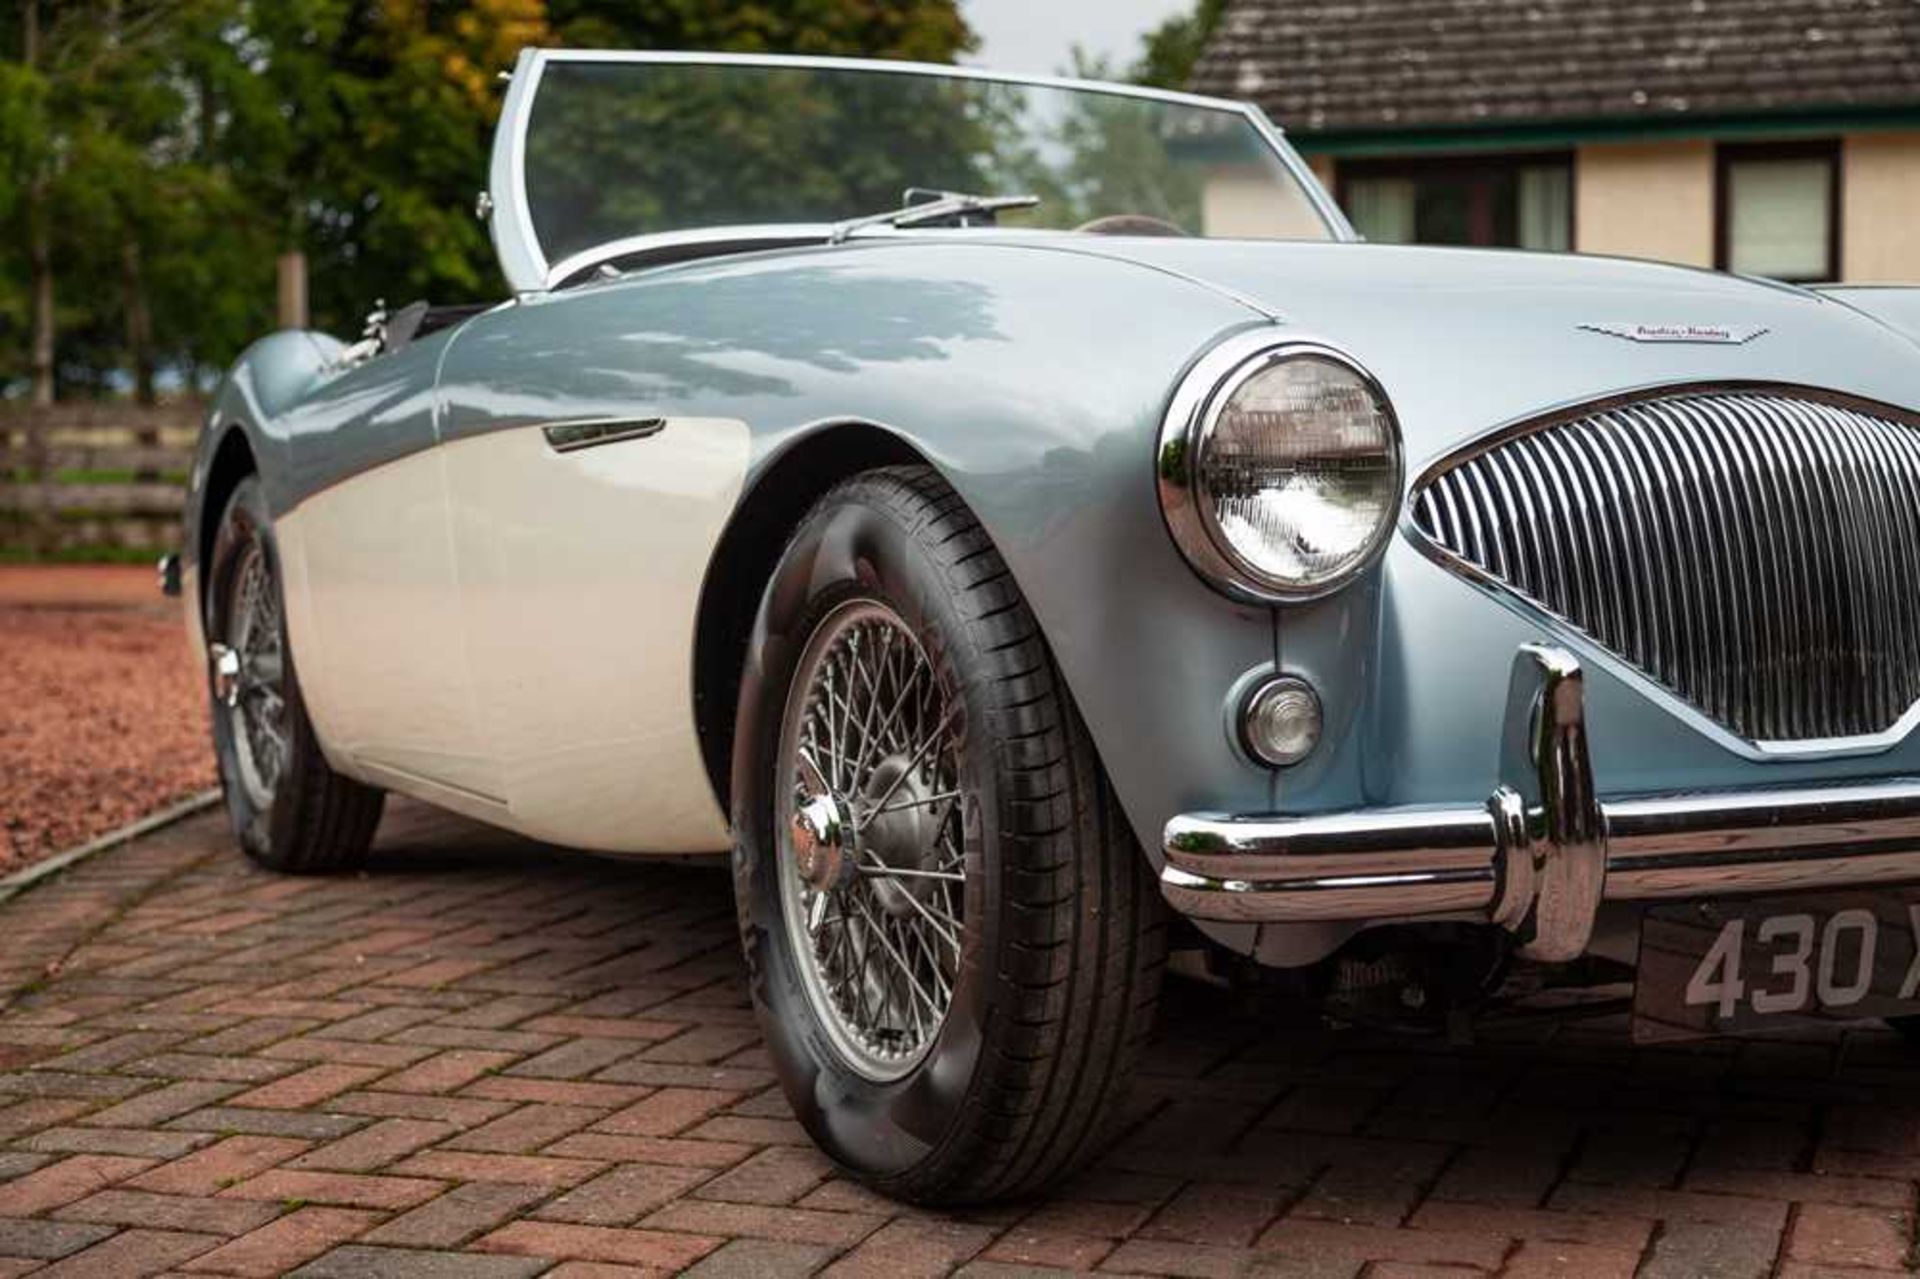 1955 Austin-Healey 100/4 Subtly Upgraded with 5-Speed Transmission and Front Disc Brakes - Image 39 of 54